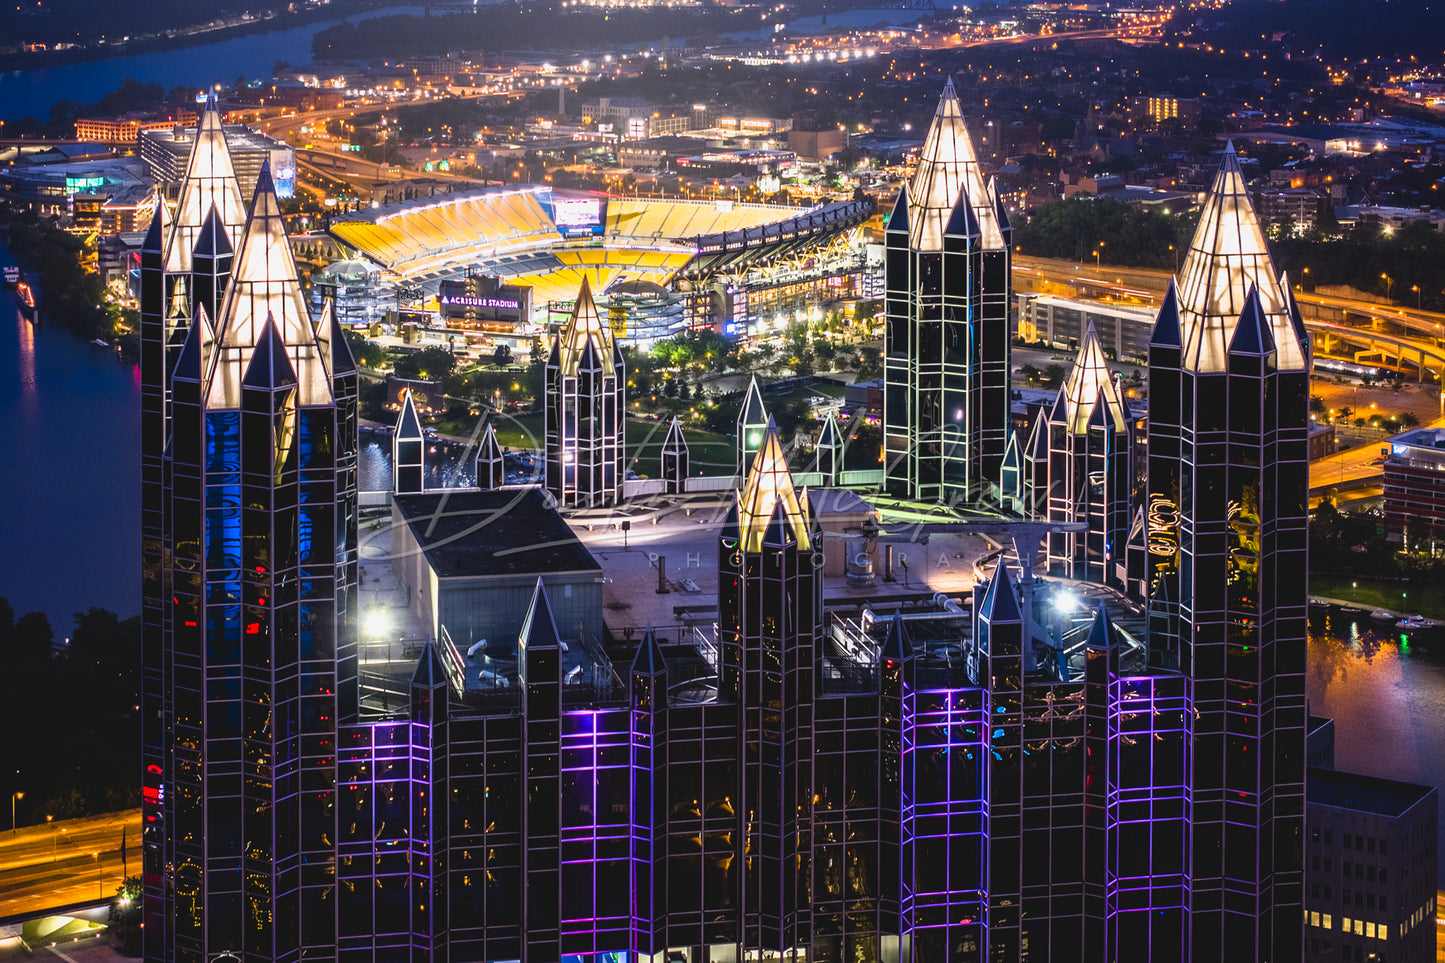 PPG Place Spires and Acrisure Stadium (Heinz Field)